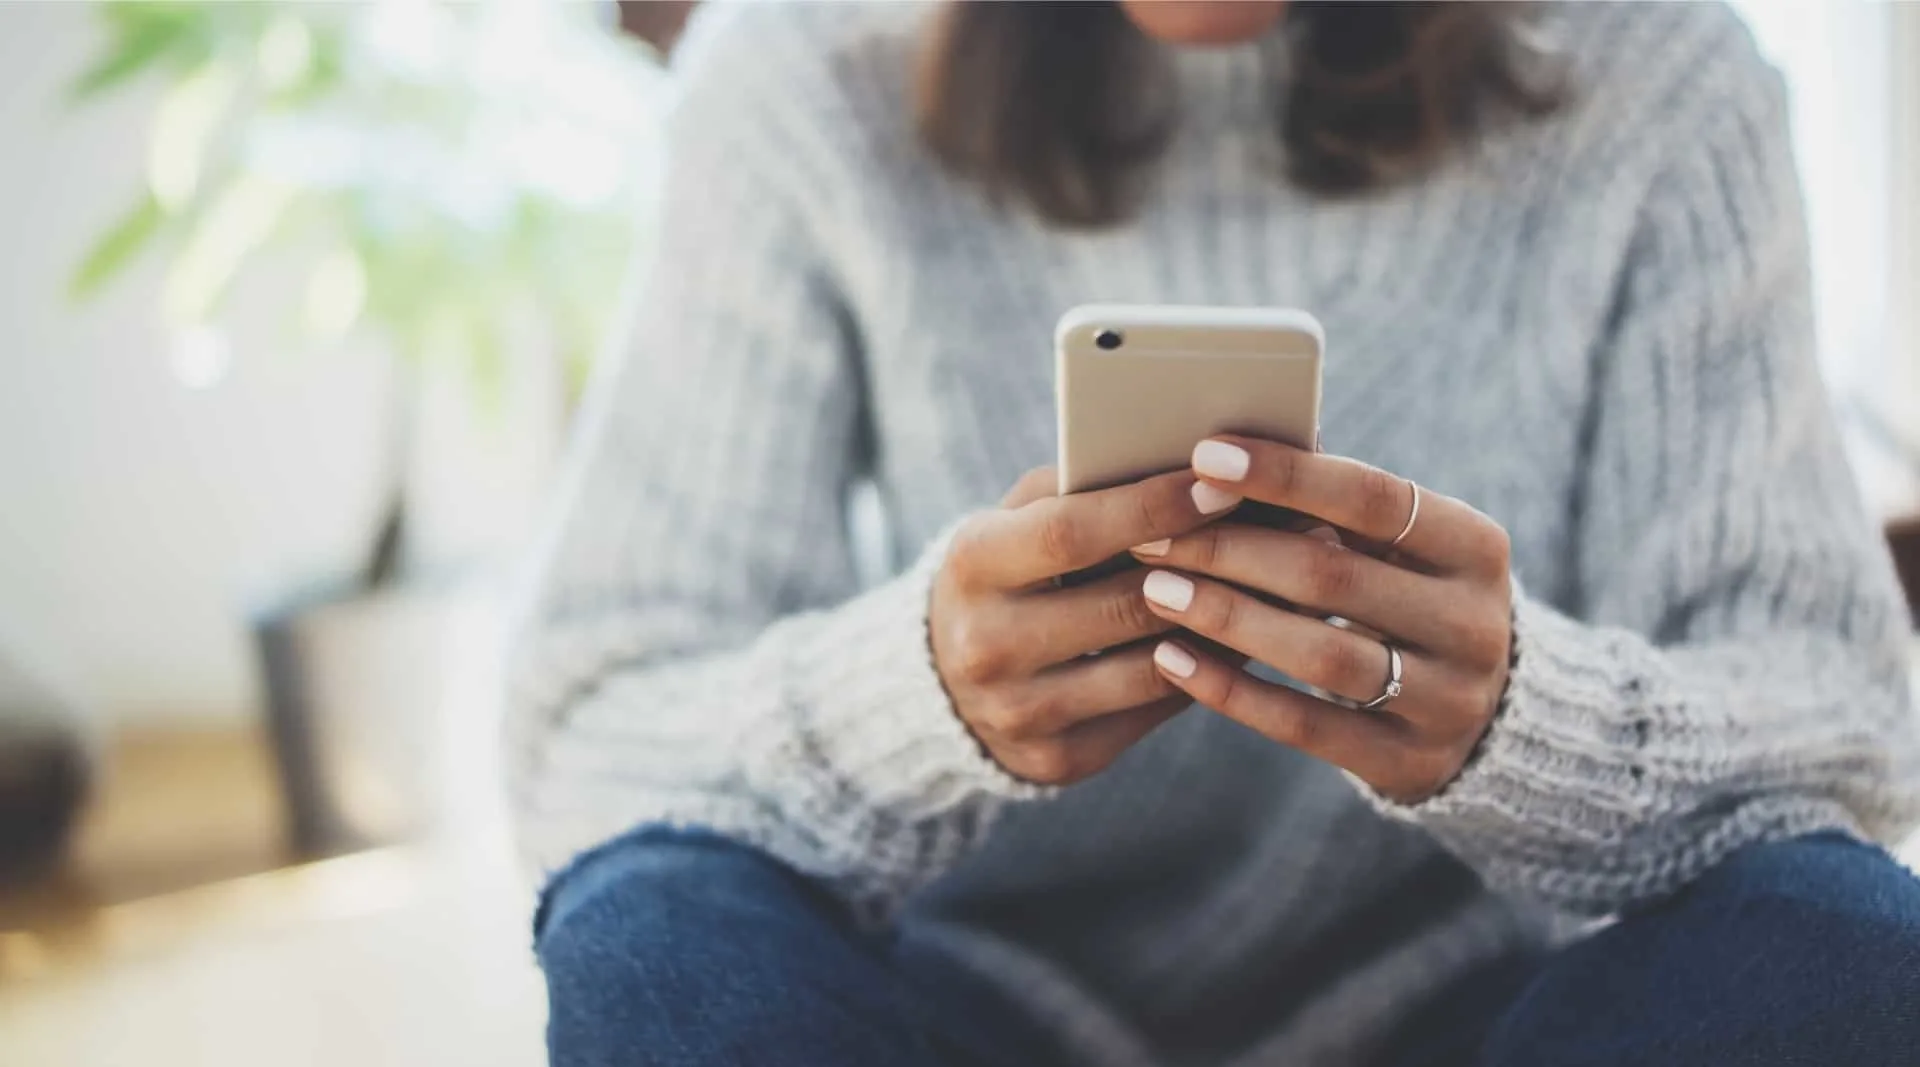 woman in gray sweater holding smartphone